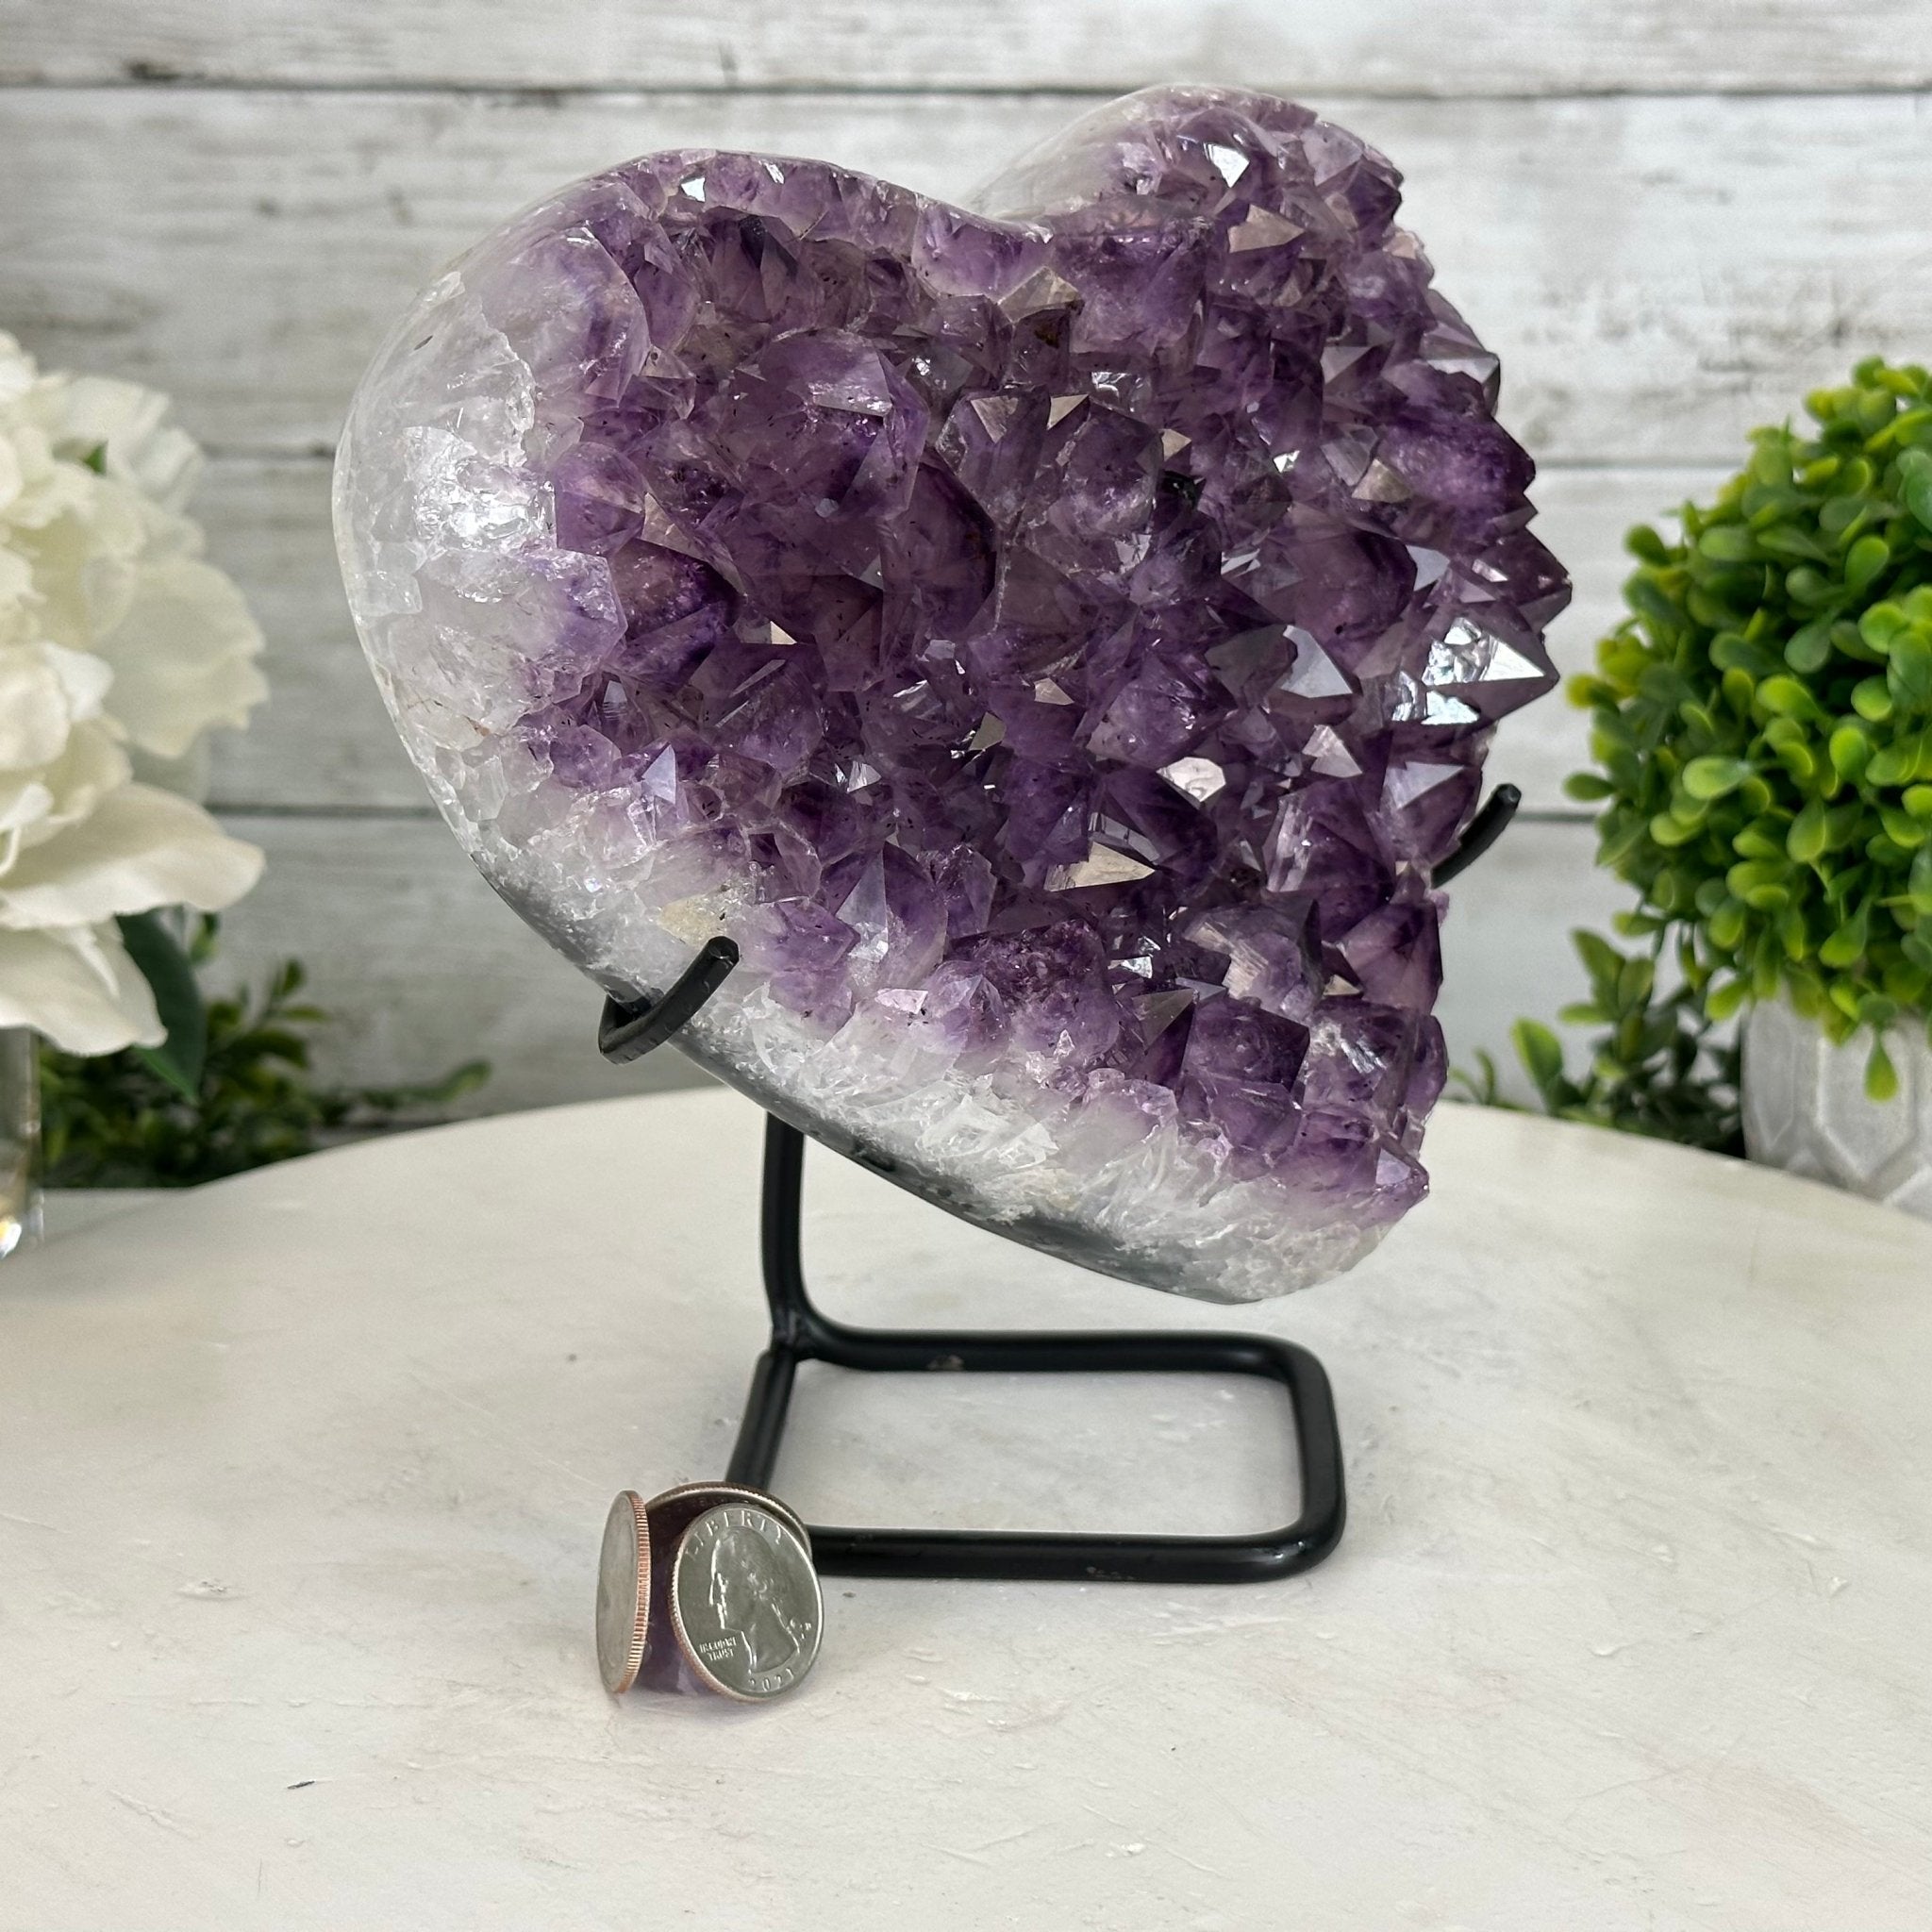 Extra Quality Amethyst Heart Geode w/ metal stand, 5.8 lbs & 7.2" Tall #5463-0290 - Brazil GemsBrazil GemsExtra Quality Amethyst Heart Geode w/ metal stand, 5.8 lbs & 7.2" Tall #5463-0290Hearts5463-0290